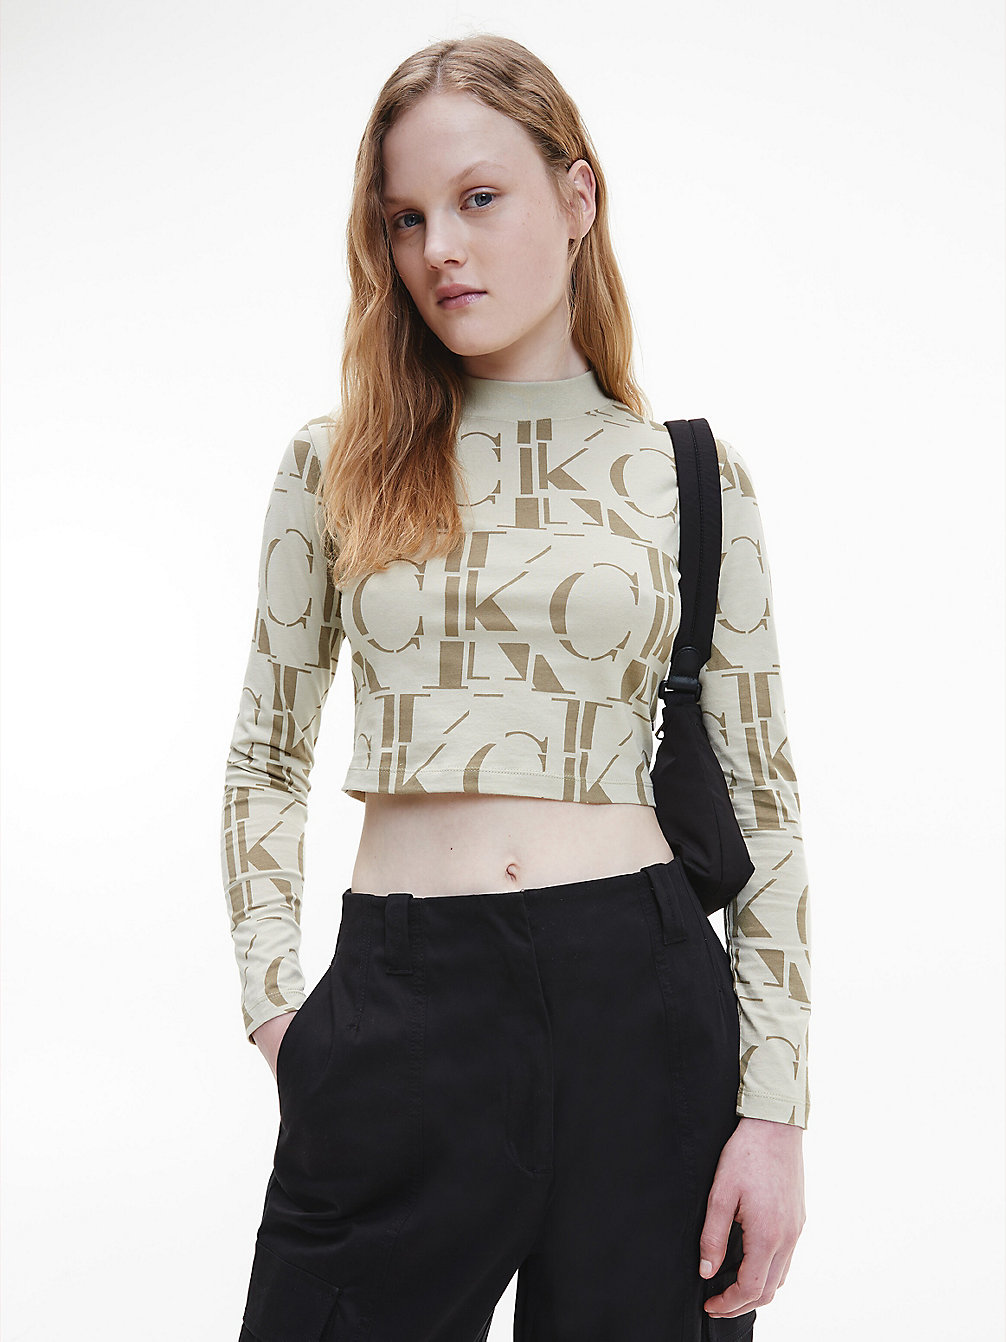 Camiseta Cropped Con Logo All Over > LOGO AOP WHEAT FIELDS > undefined mujer > Calvin Klein